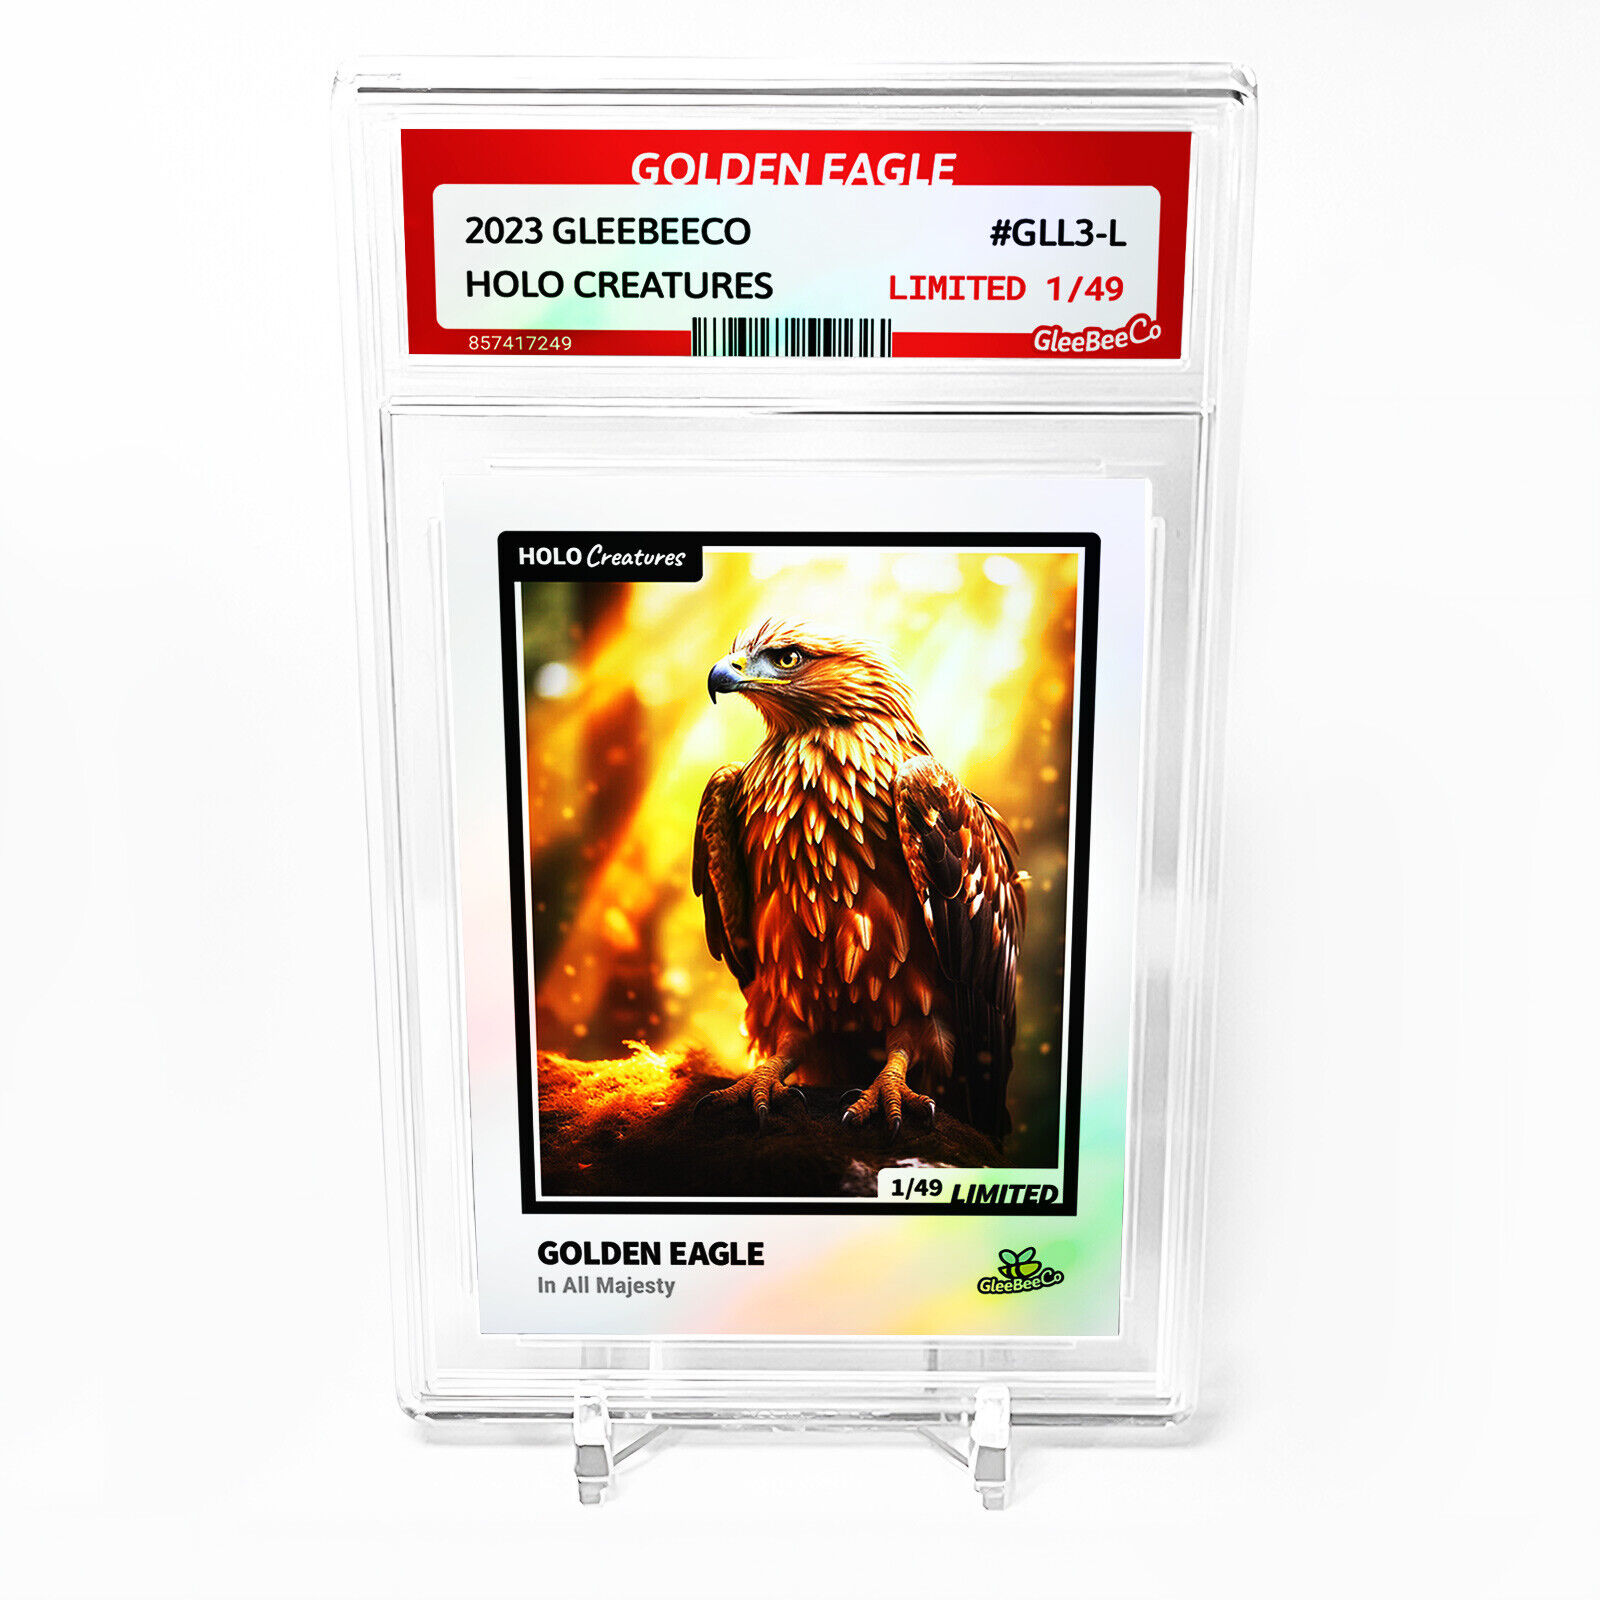 GOLDEN EAGLE Card GleeBeeCo Holo Creatures In All Majesty #GLL3-L Limited to /49